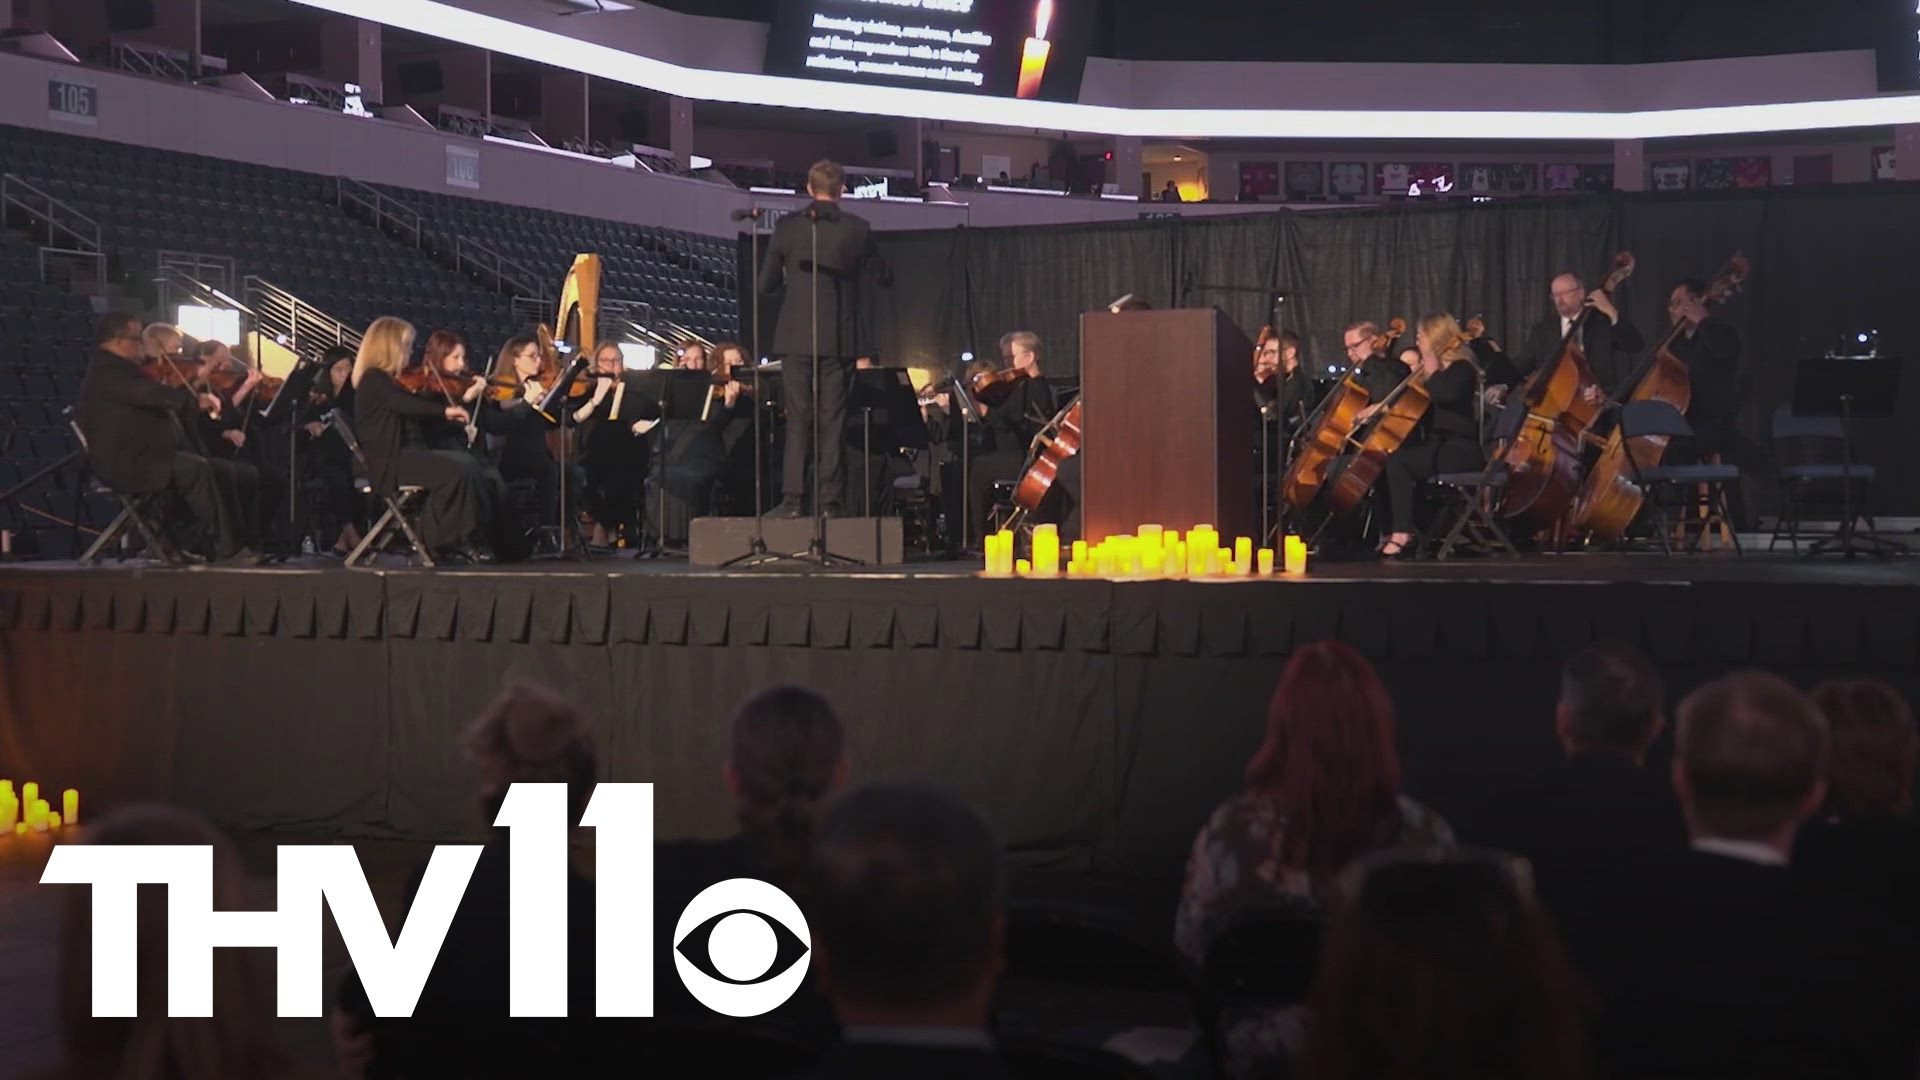 Monday marked one year since the shooting at an outlet mall in Allen, Texas. Now, the Allen Philharmonic Orchestra is unveiling a new piece to honor those lost.